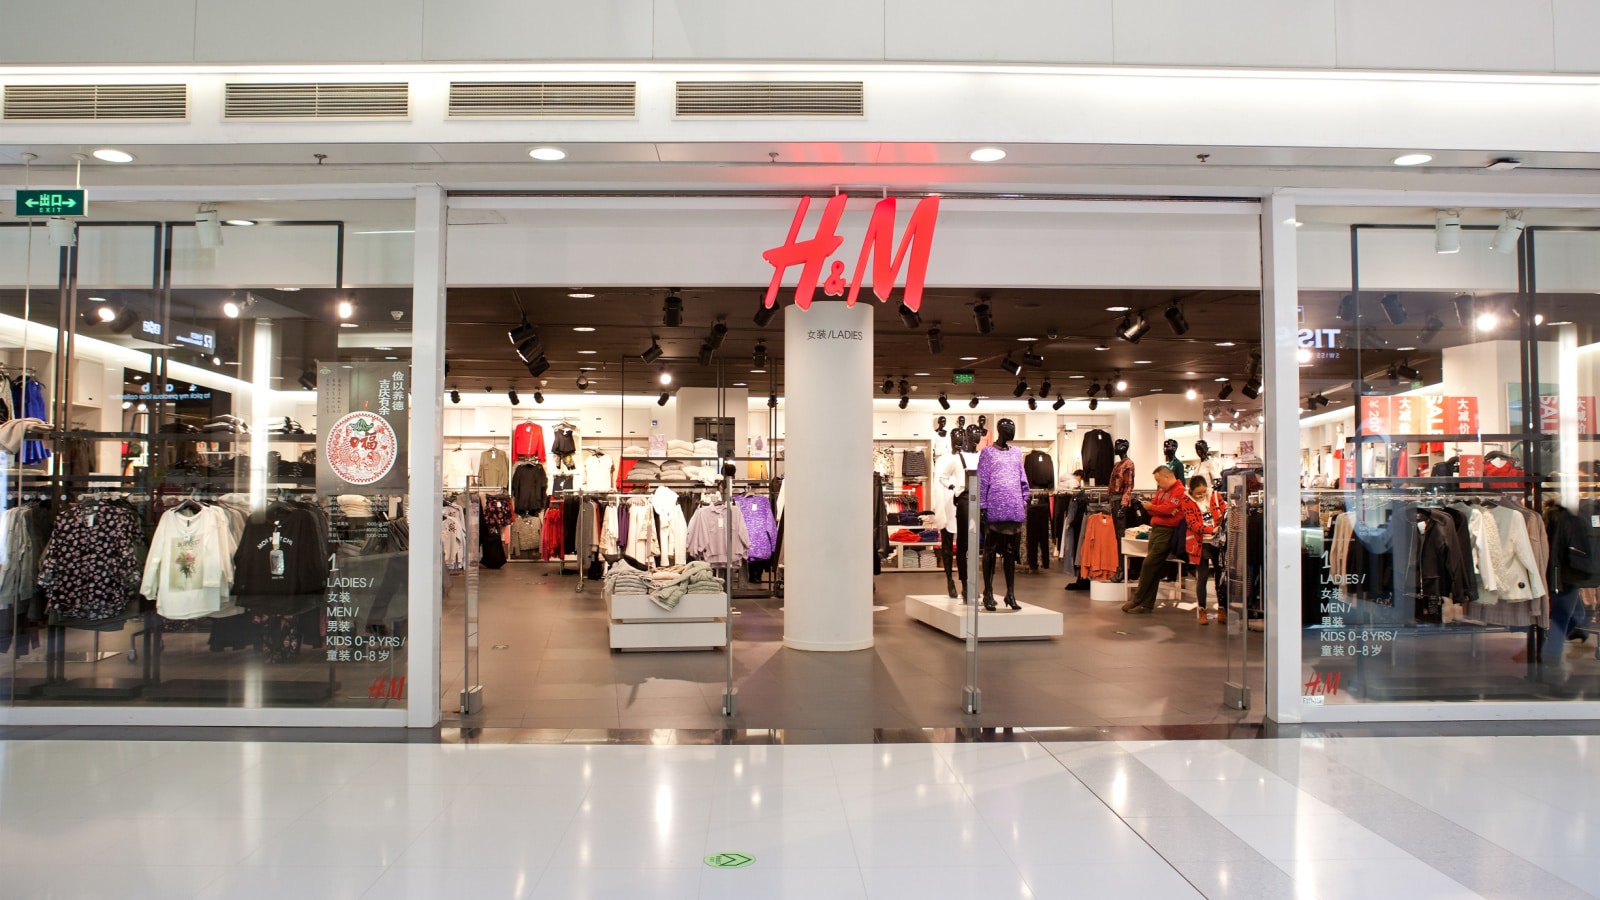 BEIJING, CHINA - JANUARY 18, 2015: H & M store; H & M Hennes & Mauritz AB (H&M), a Swedish multinational retail-clothing company, exists in 55 countries and as of 2013 employed around 116,000